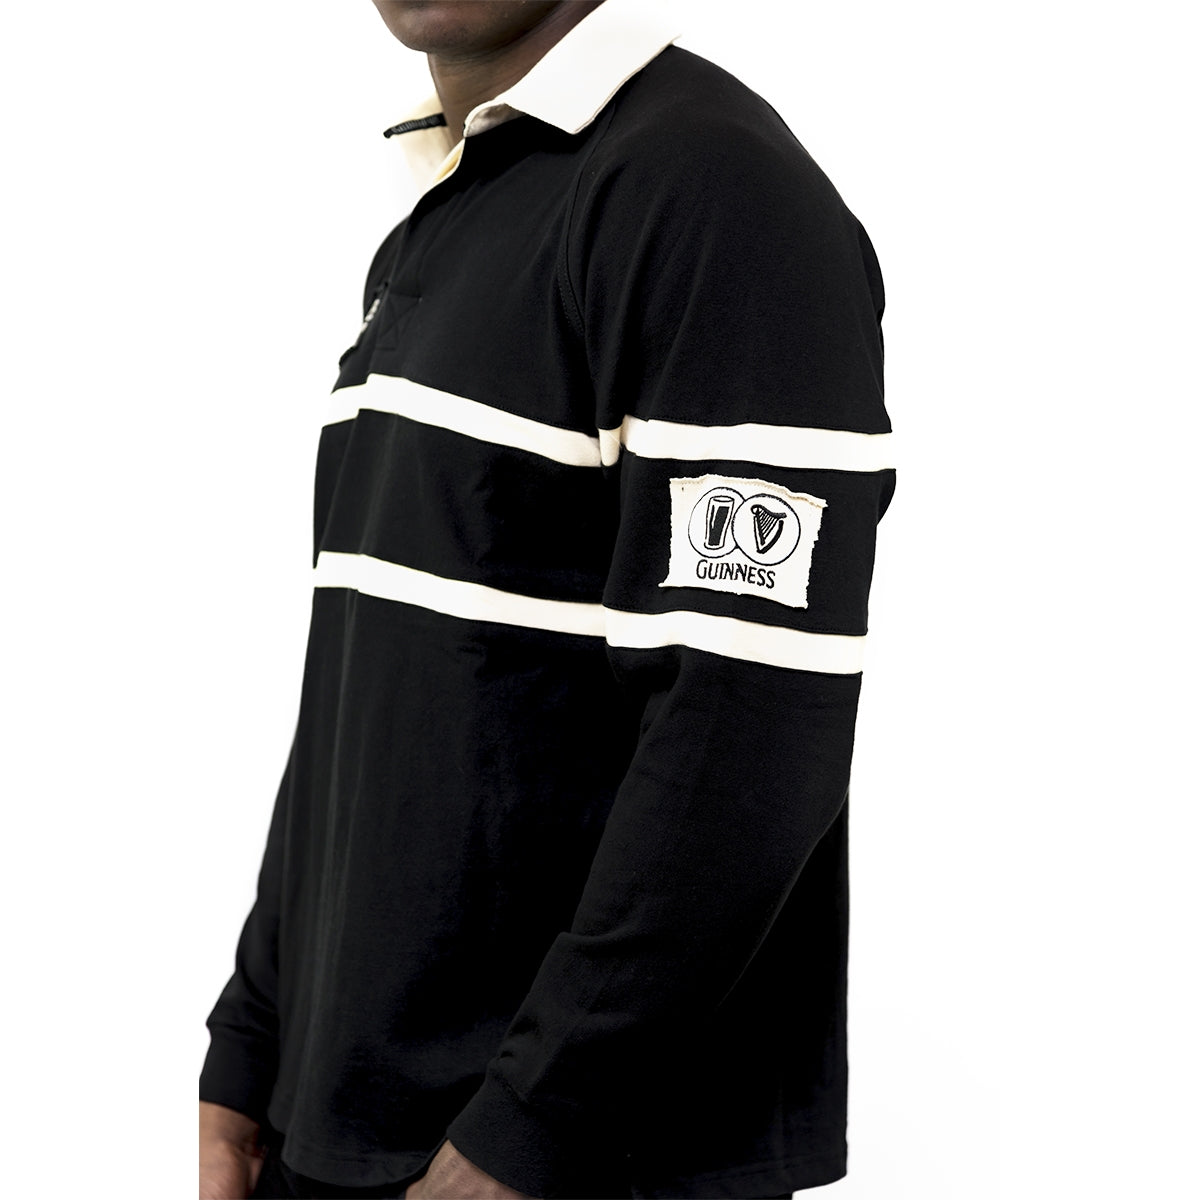 A man sporting an authentic Guinness Traditional Rugby Jersey in a black and white cotton jersey fabric shirt.